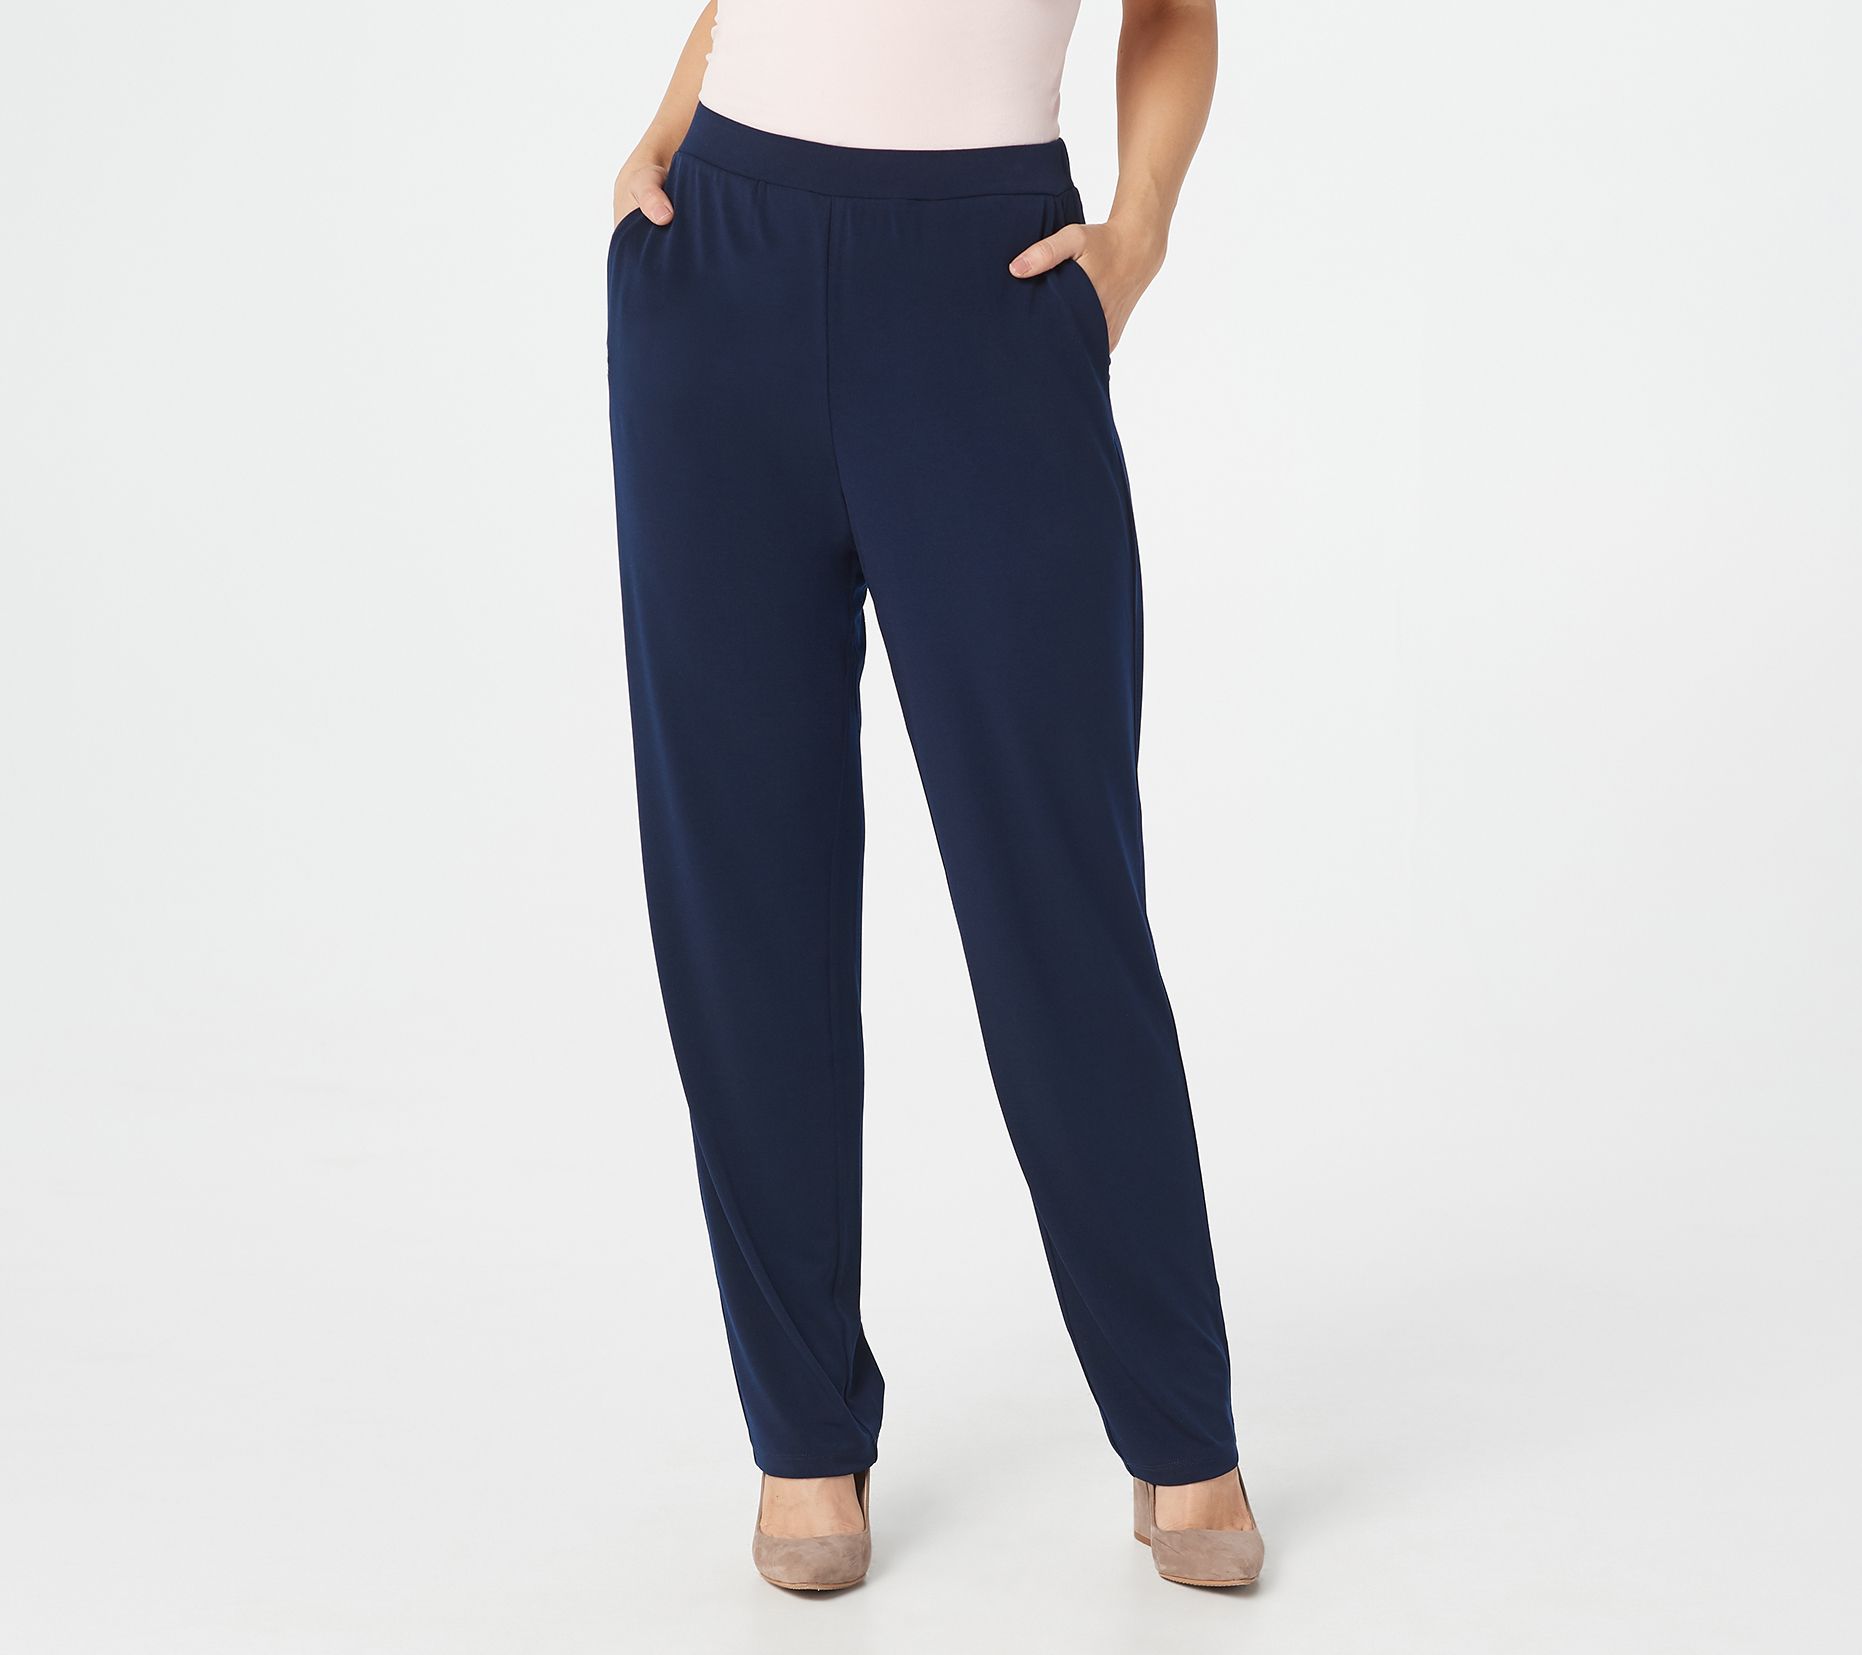 Every Day by Susan Graver Regular Liquid Knit Pull-On Pants - QVC.com